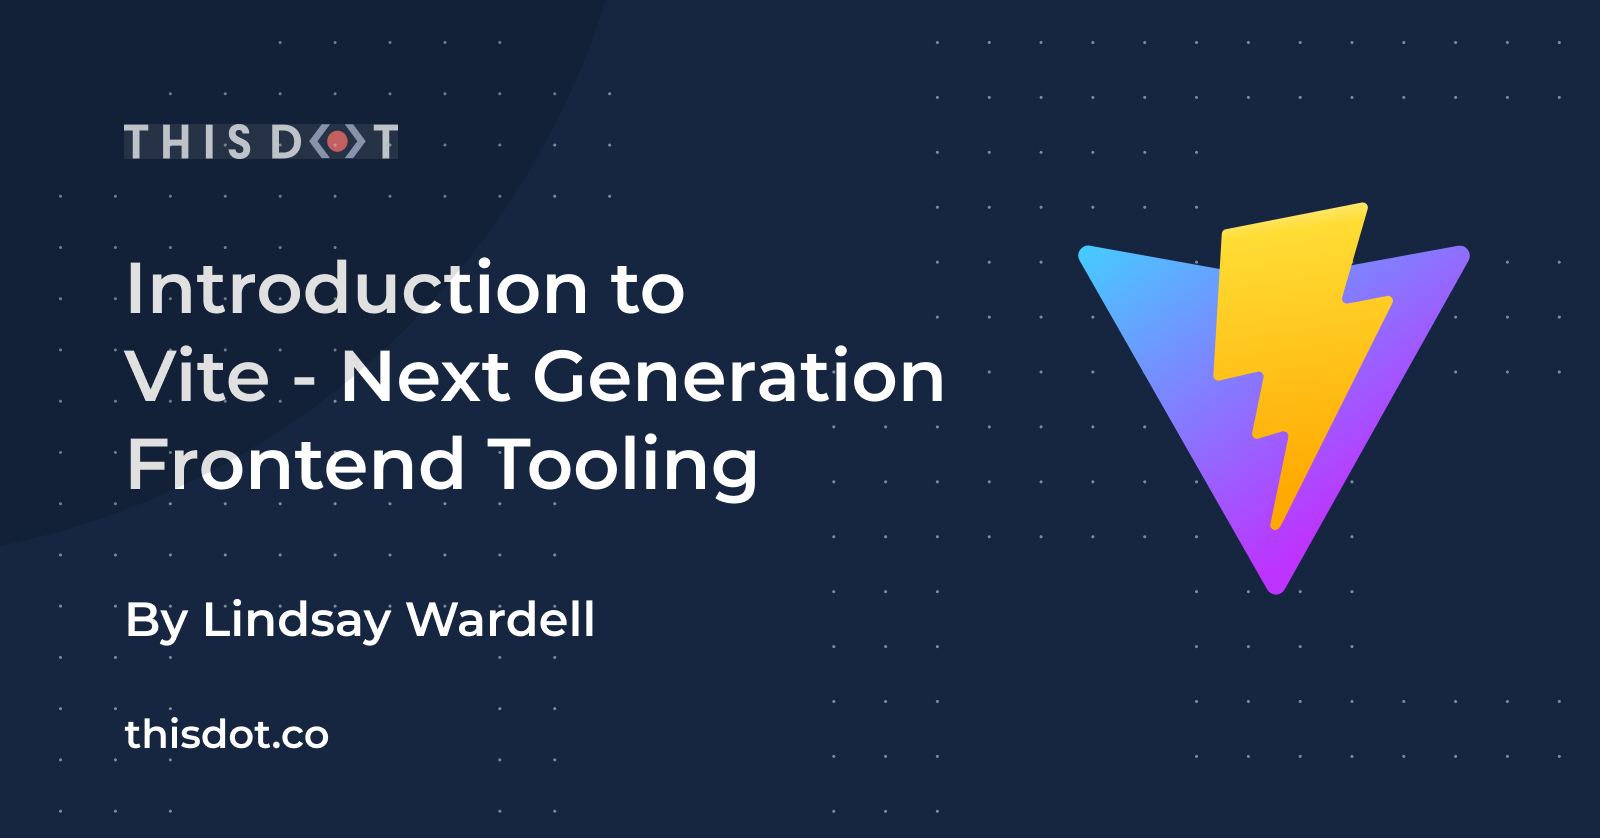 Introduction to Vite - Next Generation Frontend Tooling